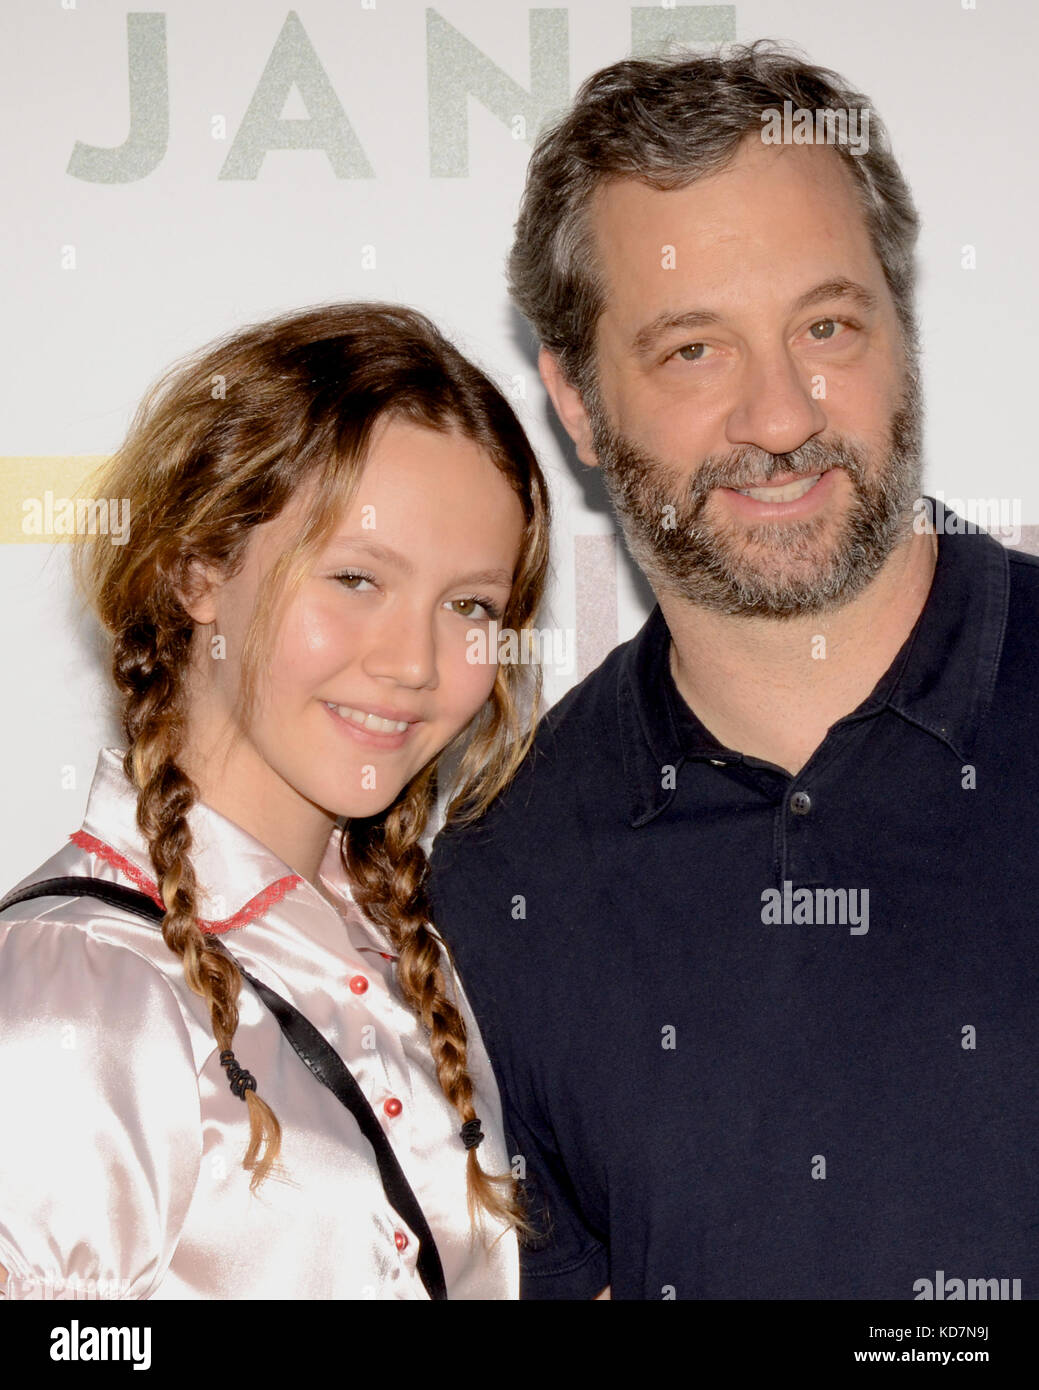 Iris Apatow Just Jared: Celebrity Gossip and Breaking Entertainment News, Page 2